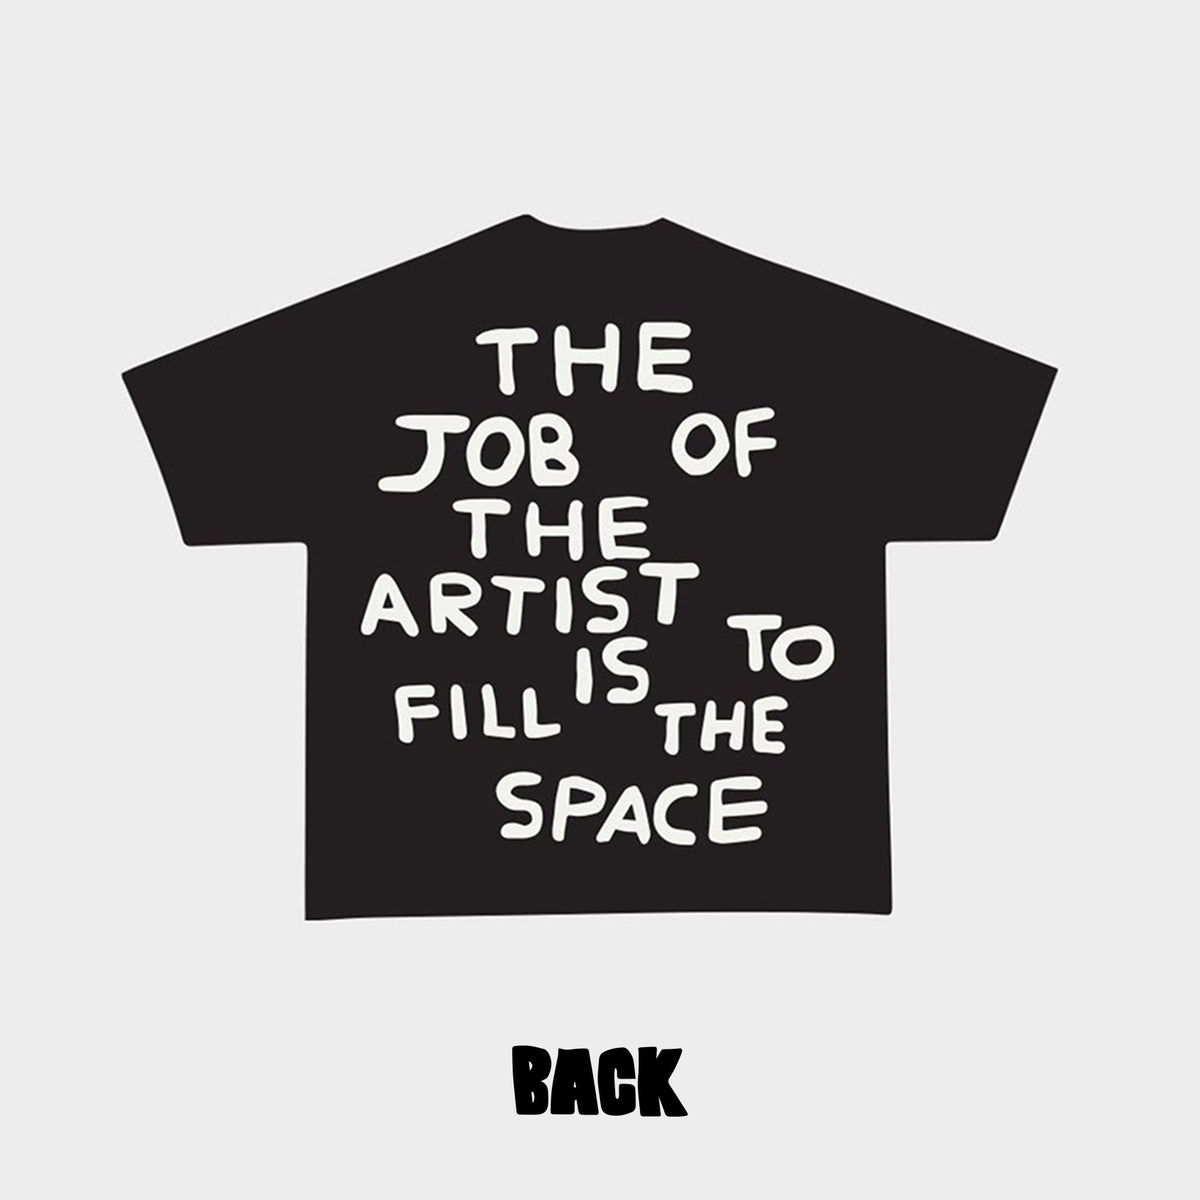 The Space Tee - RED LETTERS